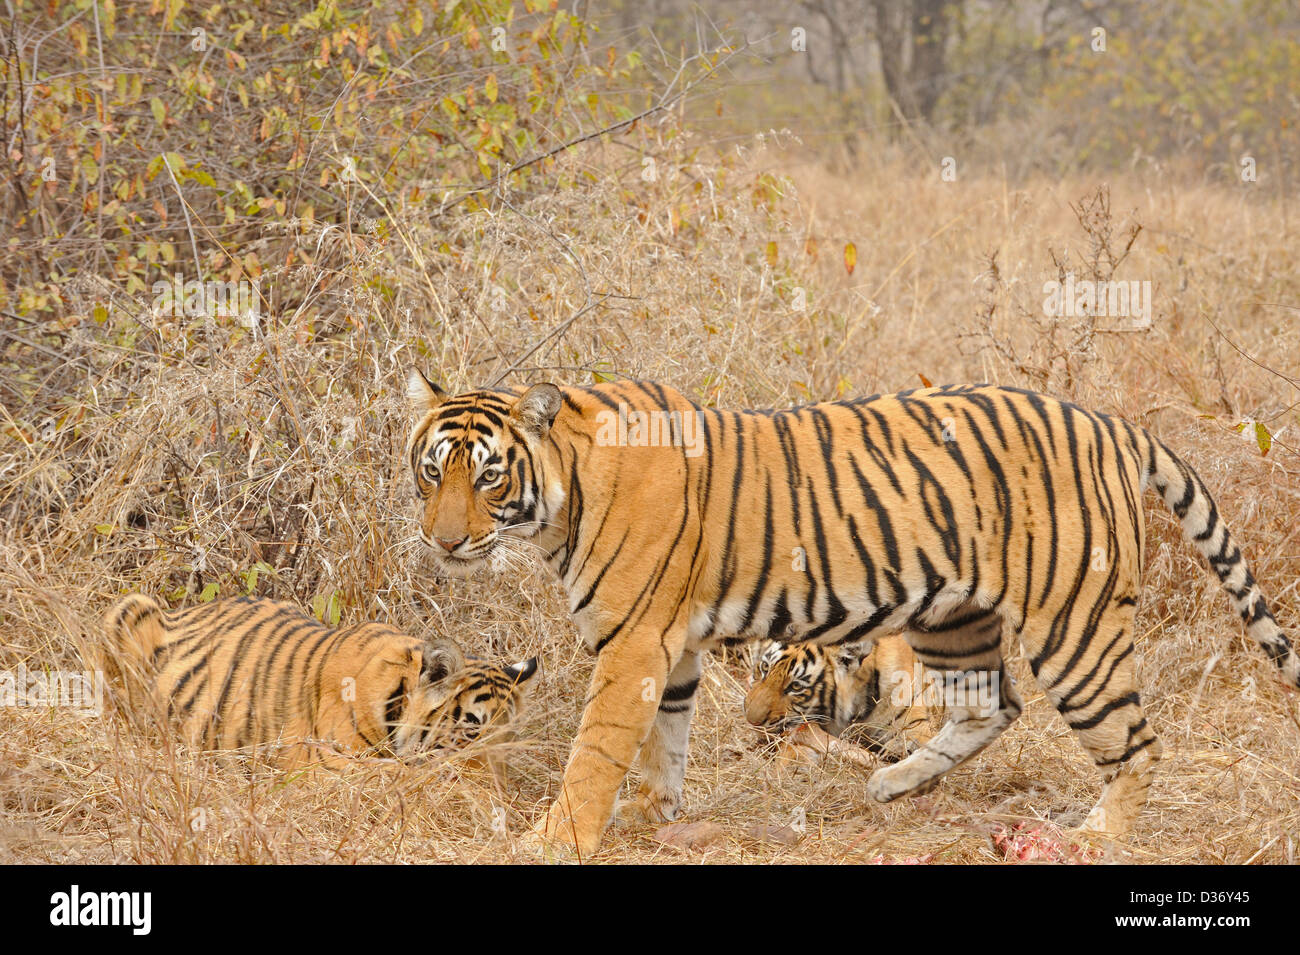 Tiger family - mother and cubs - on a deer kill in the grasslands in Ranthambhore national park, India Stock Photo